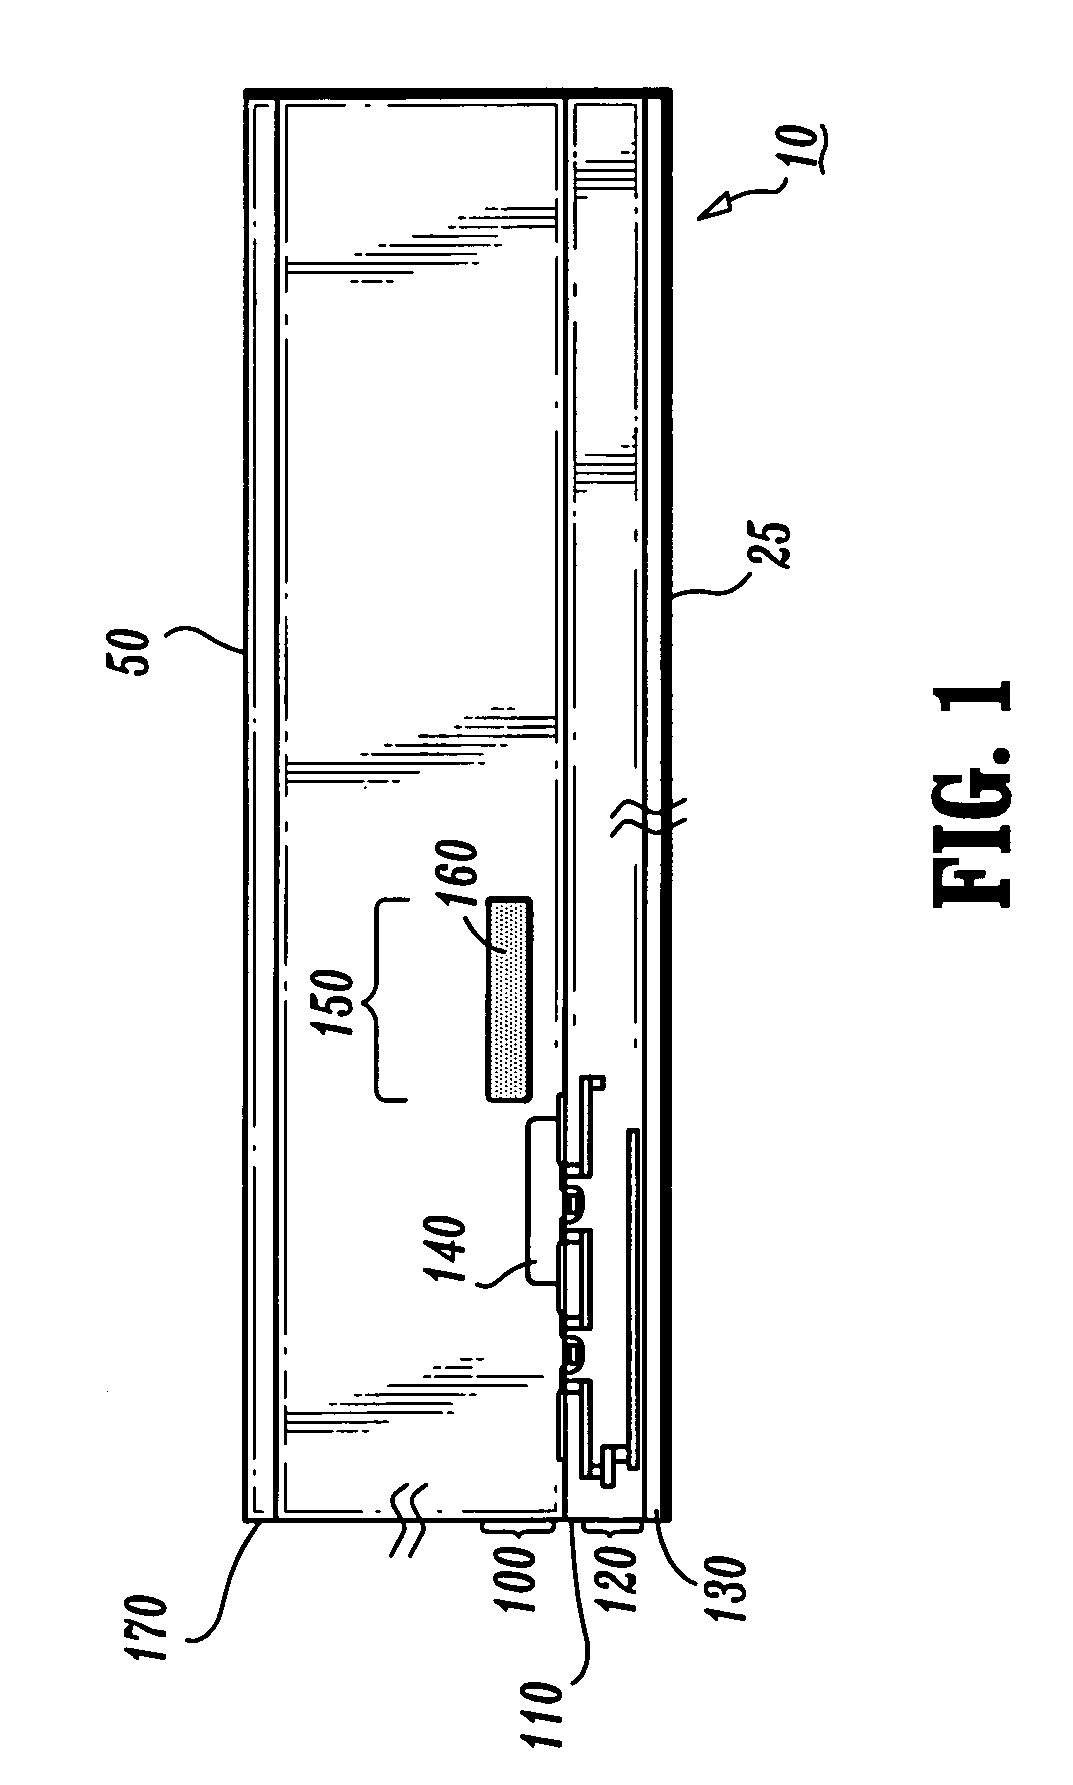 Cooling system for a semiconductor device and method of fabricating same